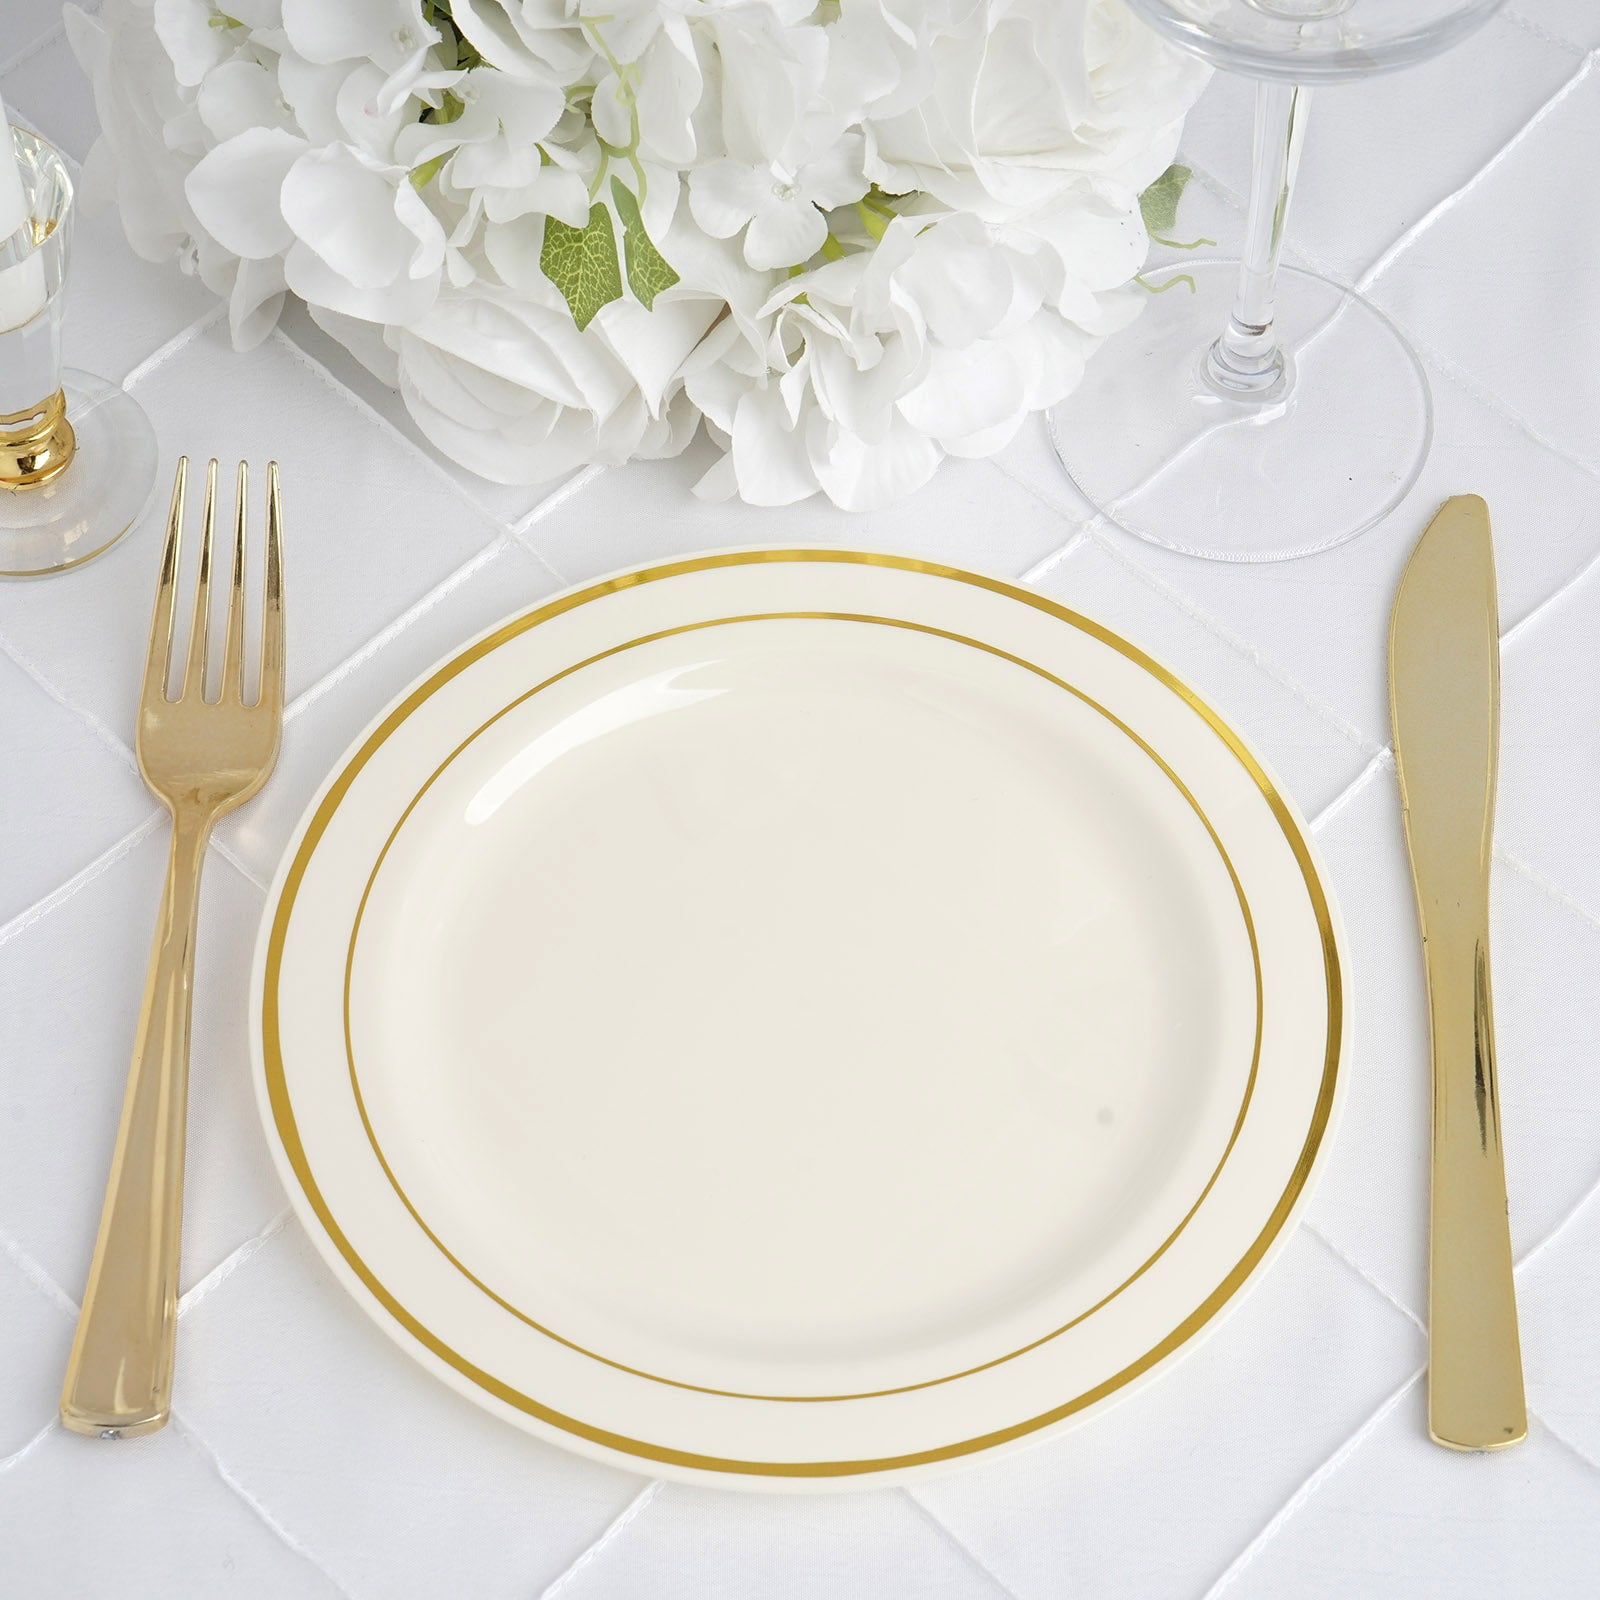 10/pk  Ivory w/ Gold 6" Round Disposable Plastic Plate wedding/catering 